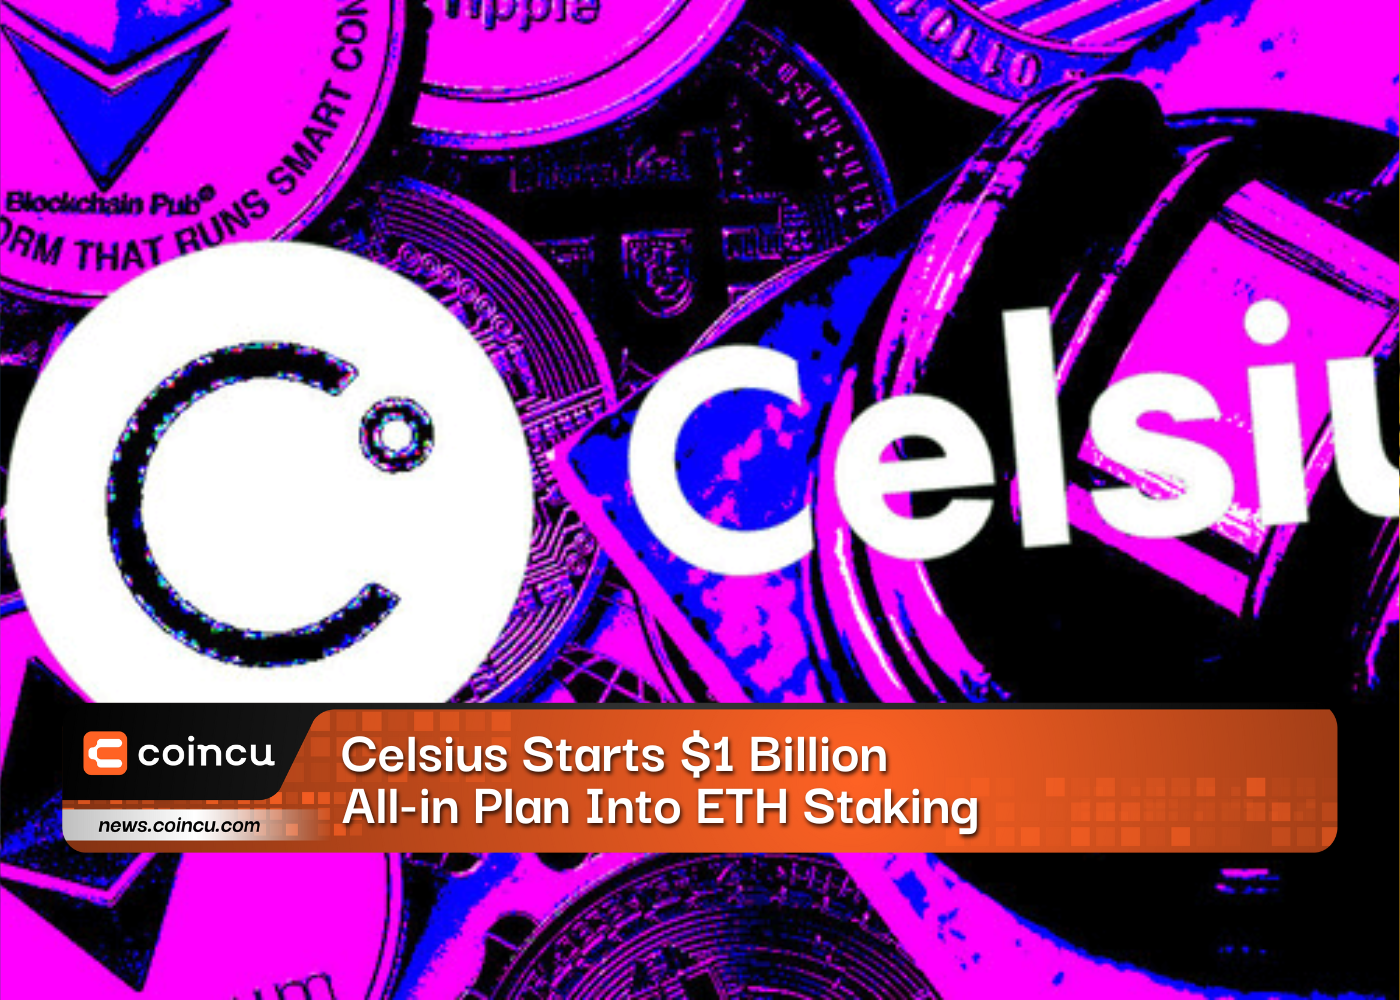 Celsius Starts $1 Billion All-in Plan Into ETH Staking